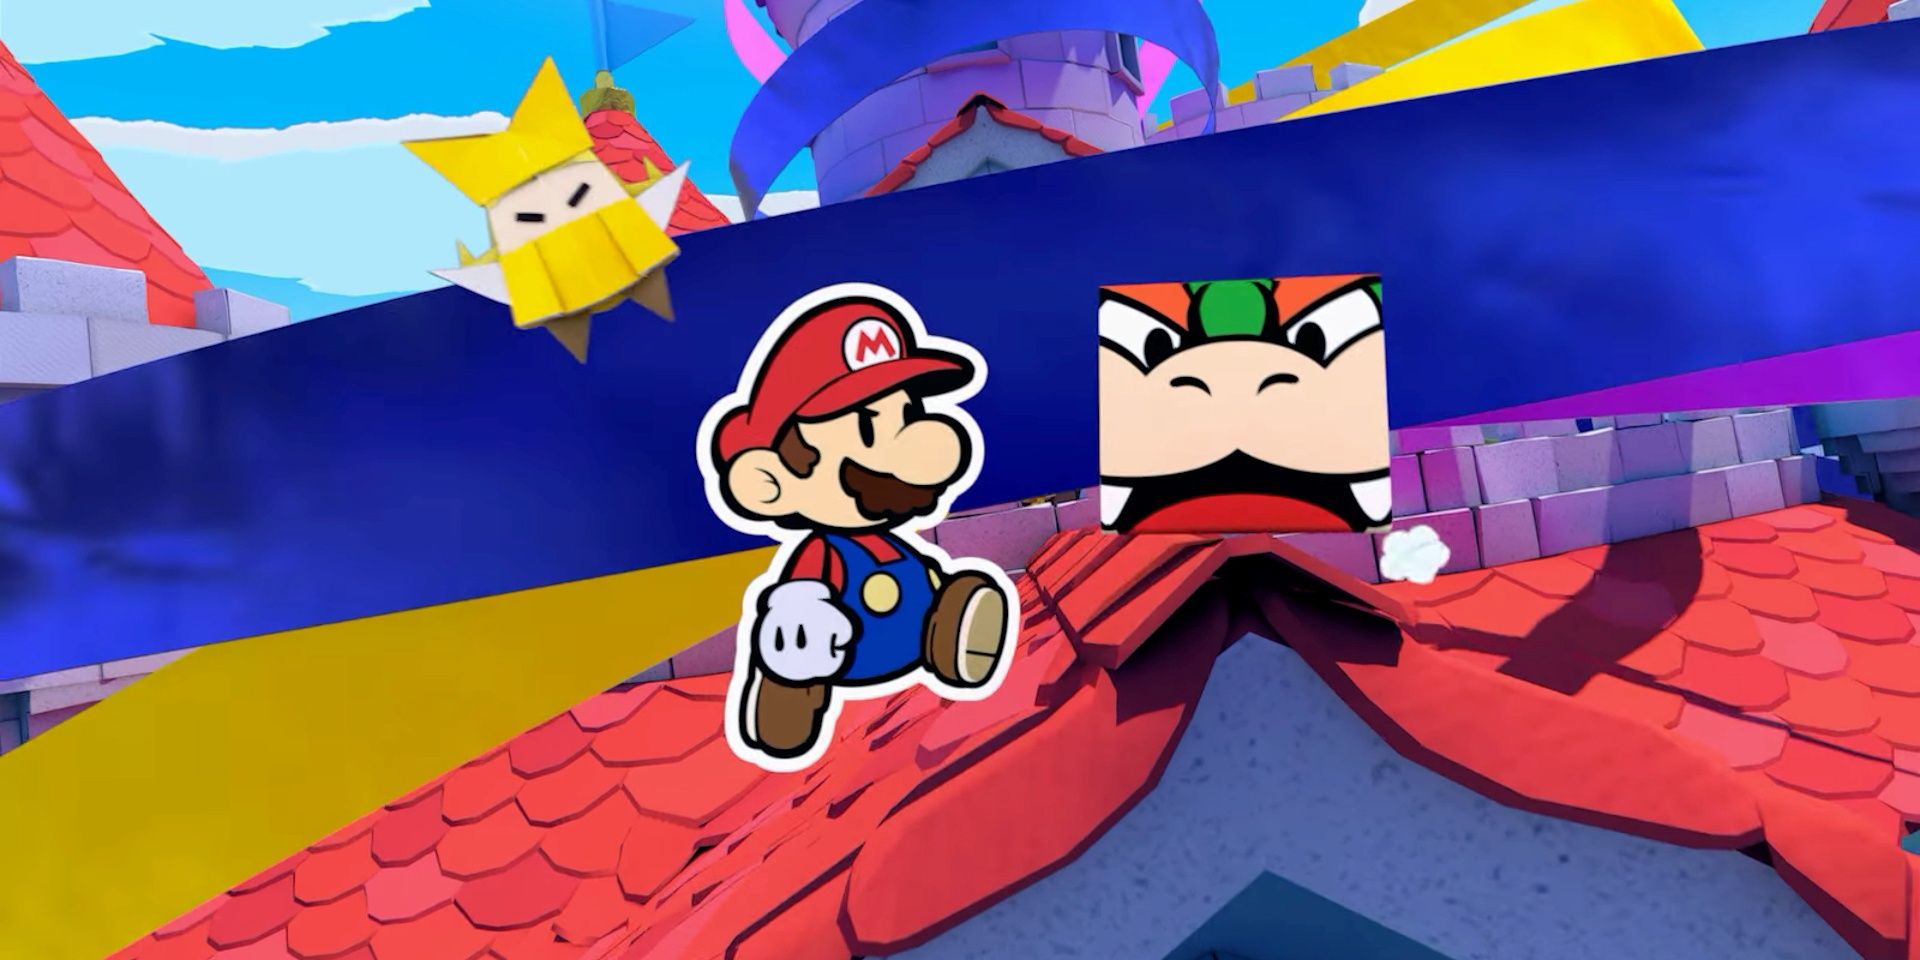 Paper Mario from Paper Mario: The Origami King 